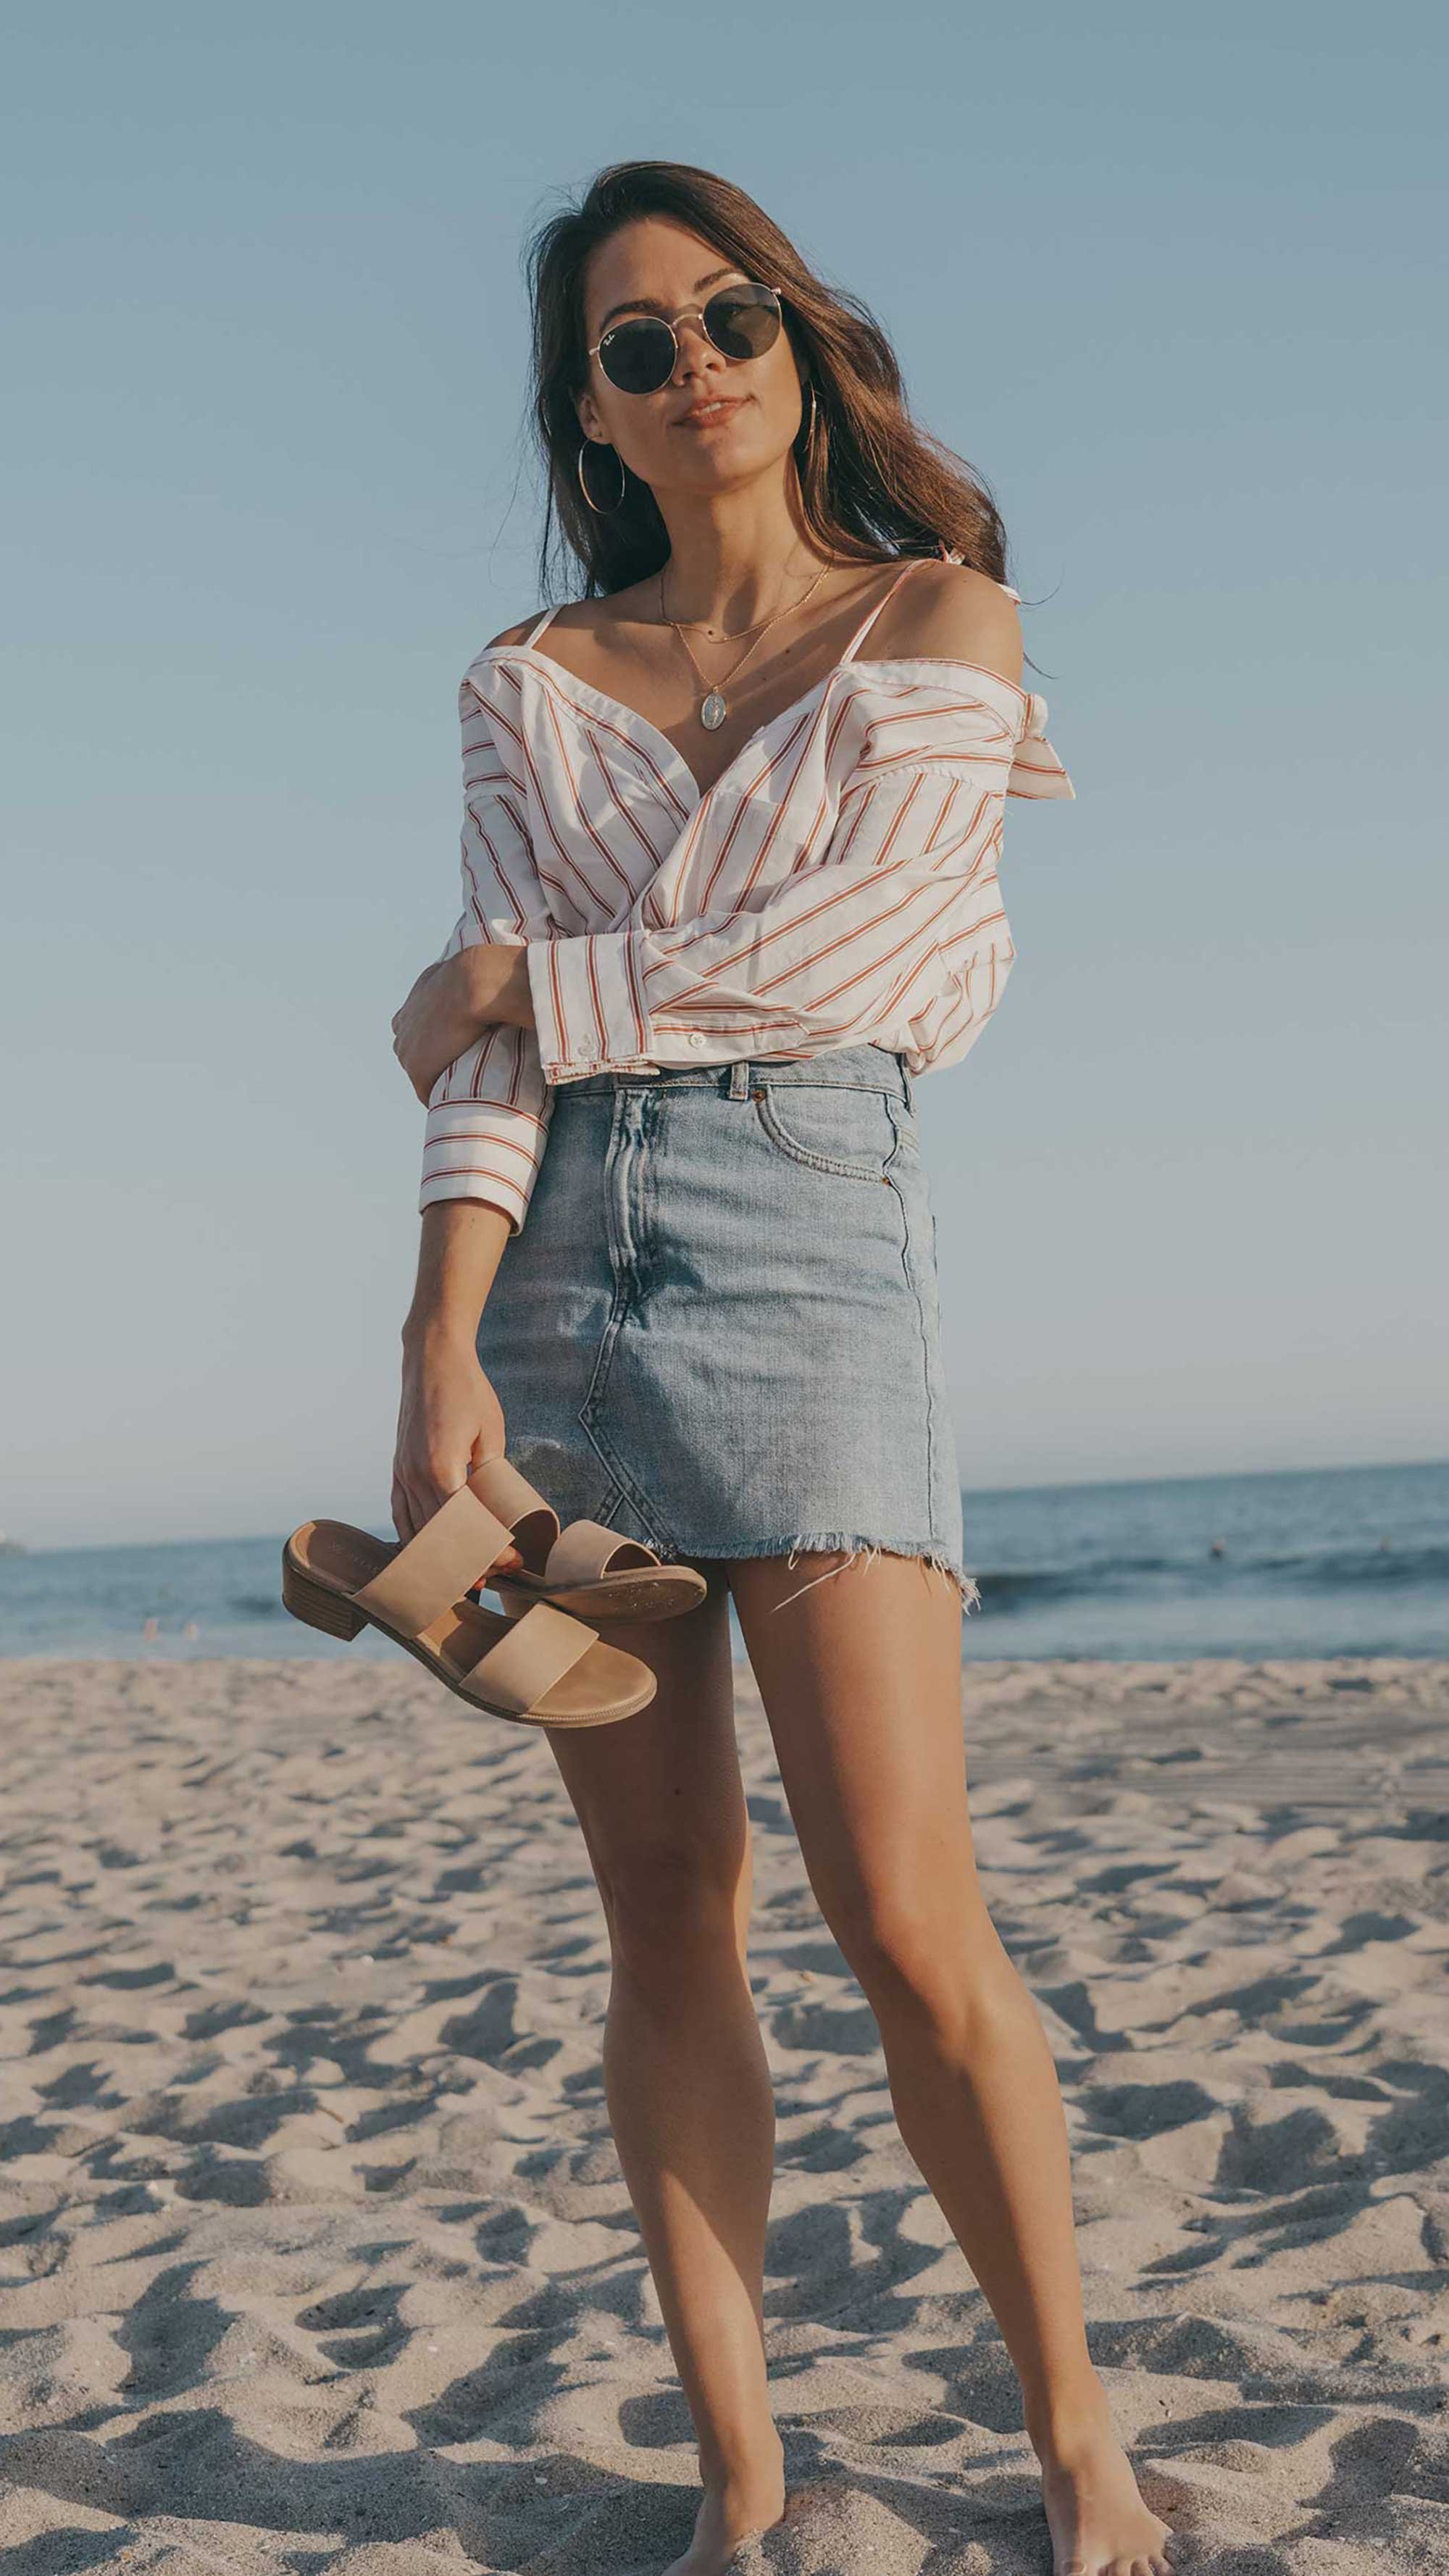 Easy Summer Outfit Idea. Sarah Butler of @sarahchristine wearing Off-the-Shoulder Stripe Button-up Shirt and Denim Mini Skirt in Newport Beach, California. summer outfit, summer outfit ideas, casual summer outfits -2.jpg